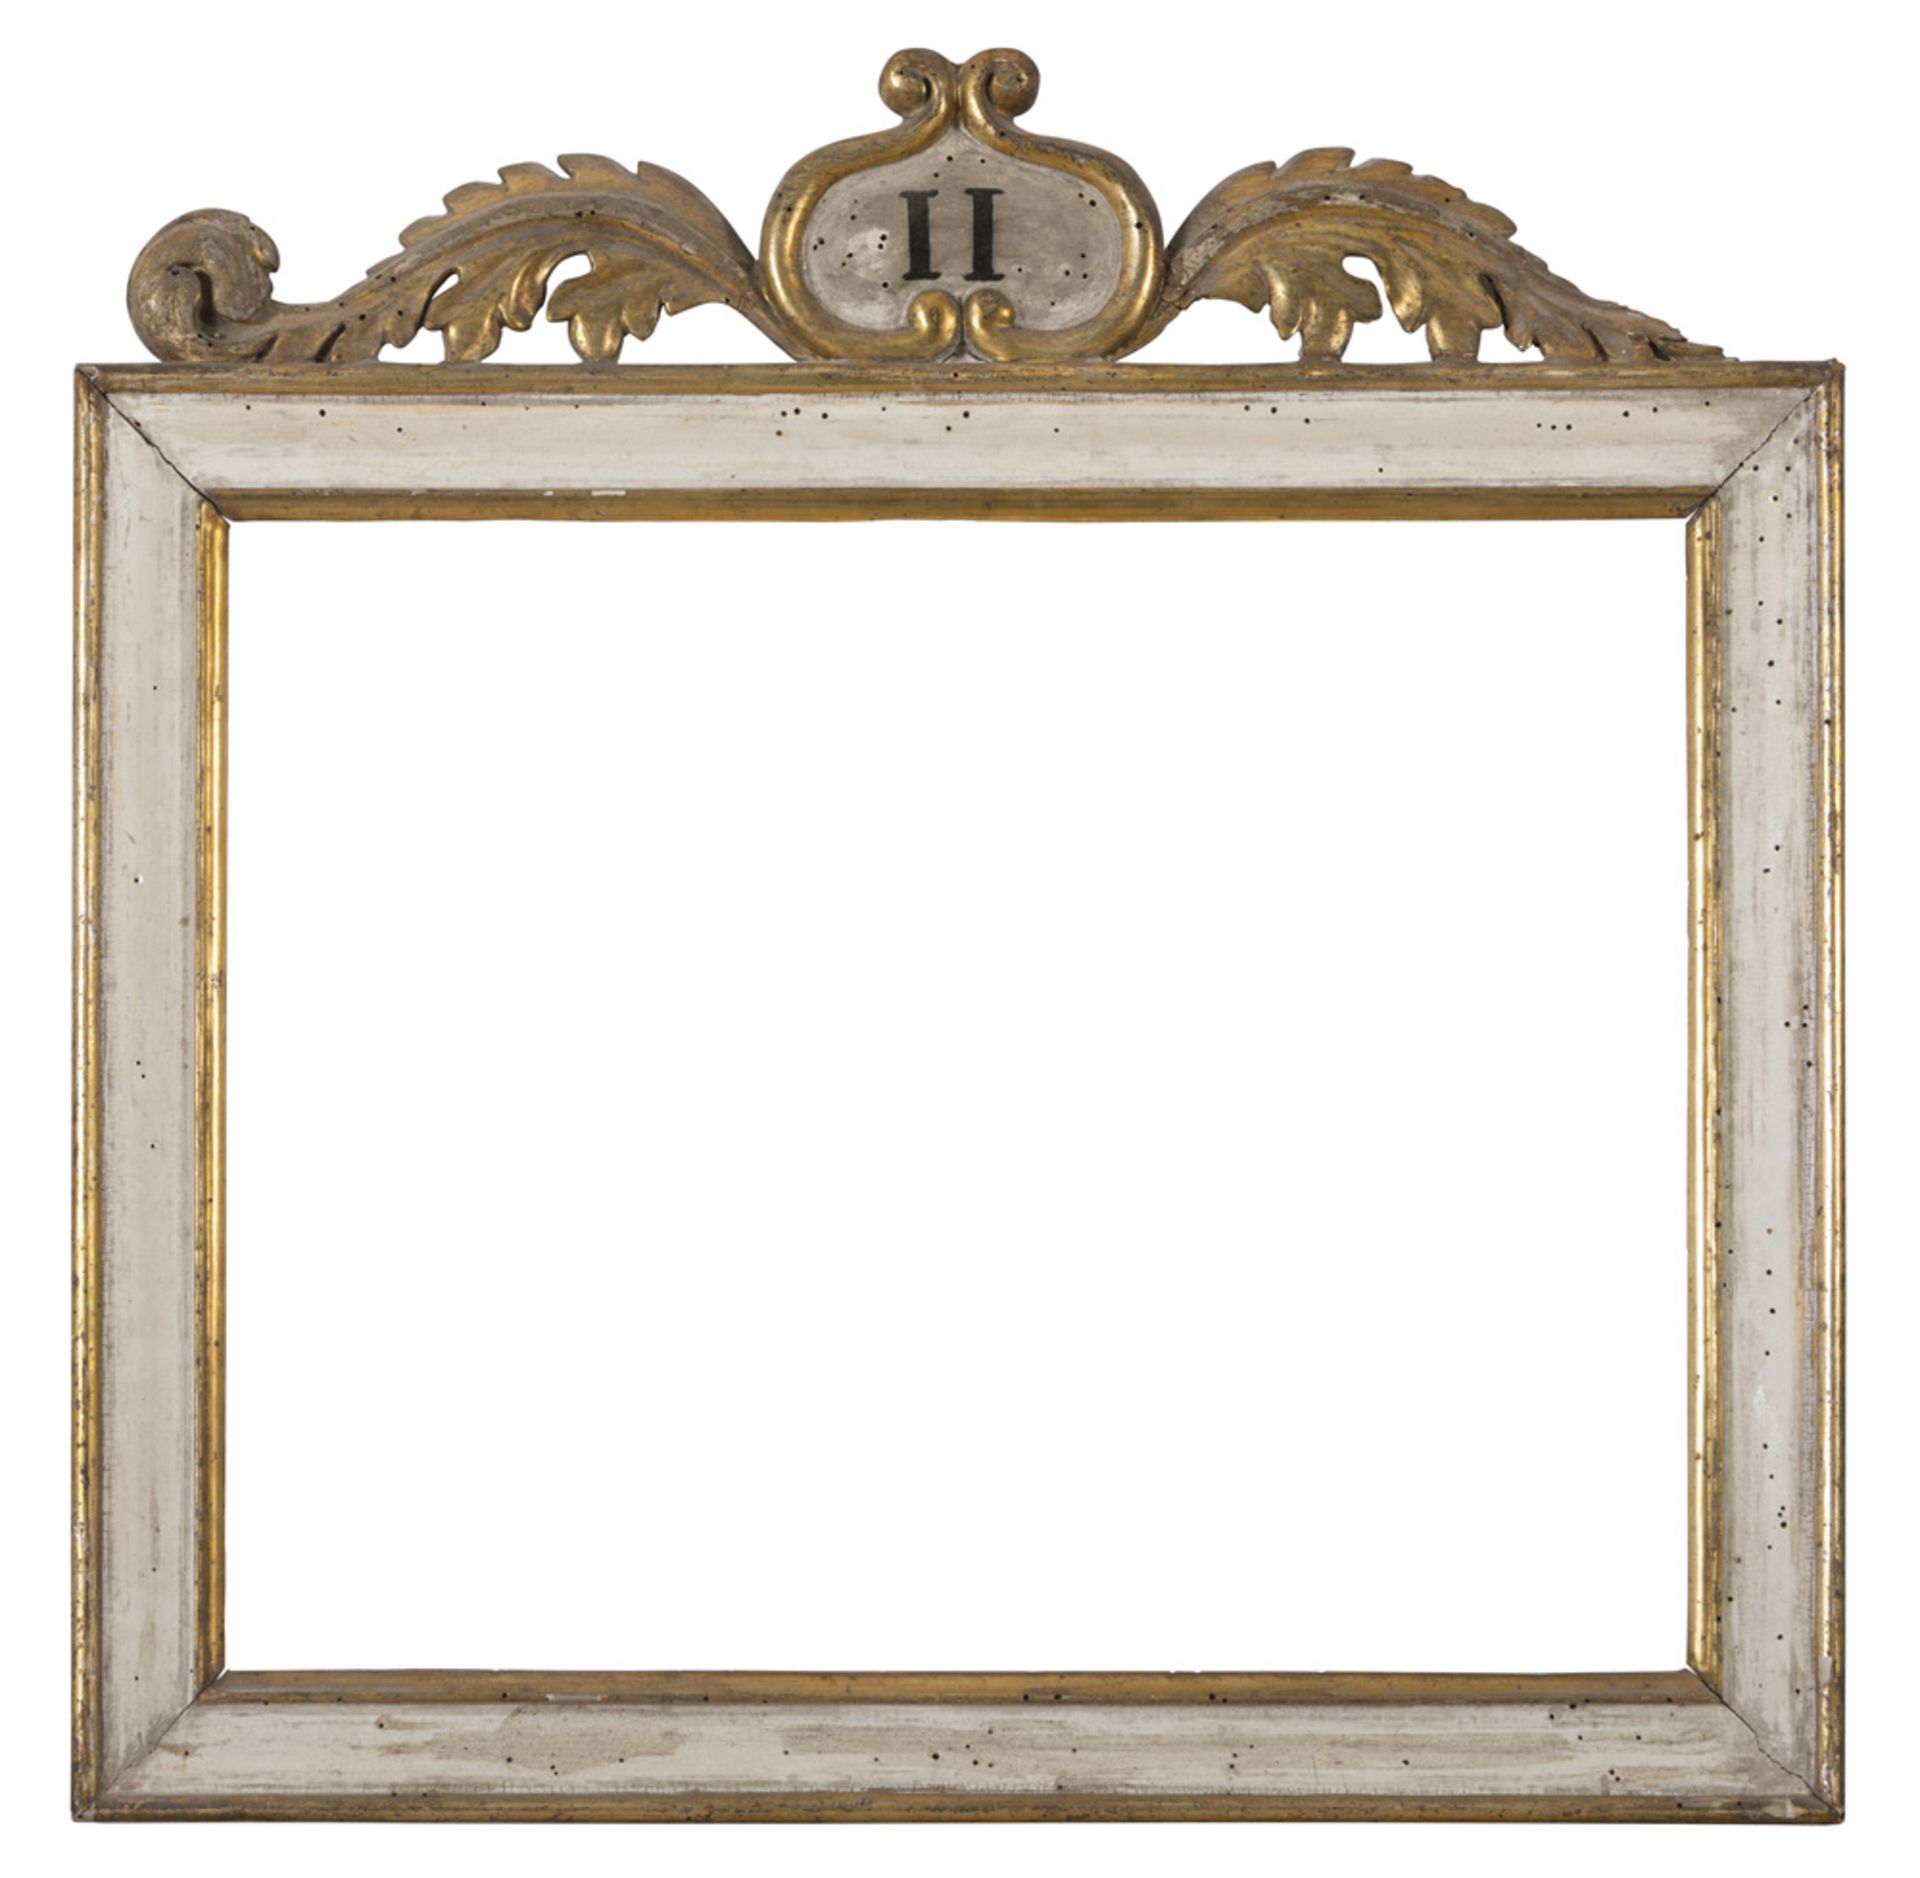 A PAIR OF SMALL FRAMES, NAPLES 19TH CENTURY in white and gold lacquered wood, with superior - Image 2 of 2